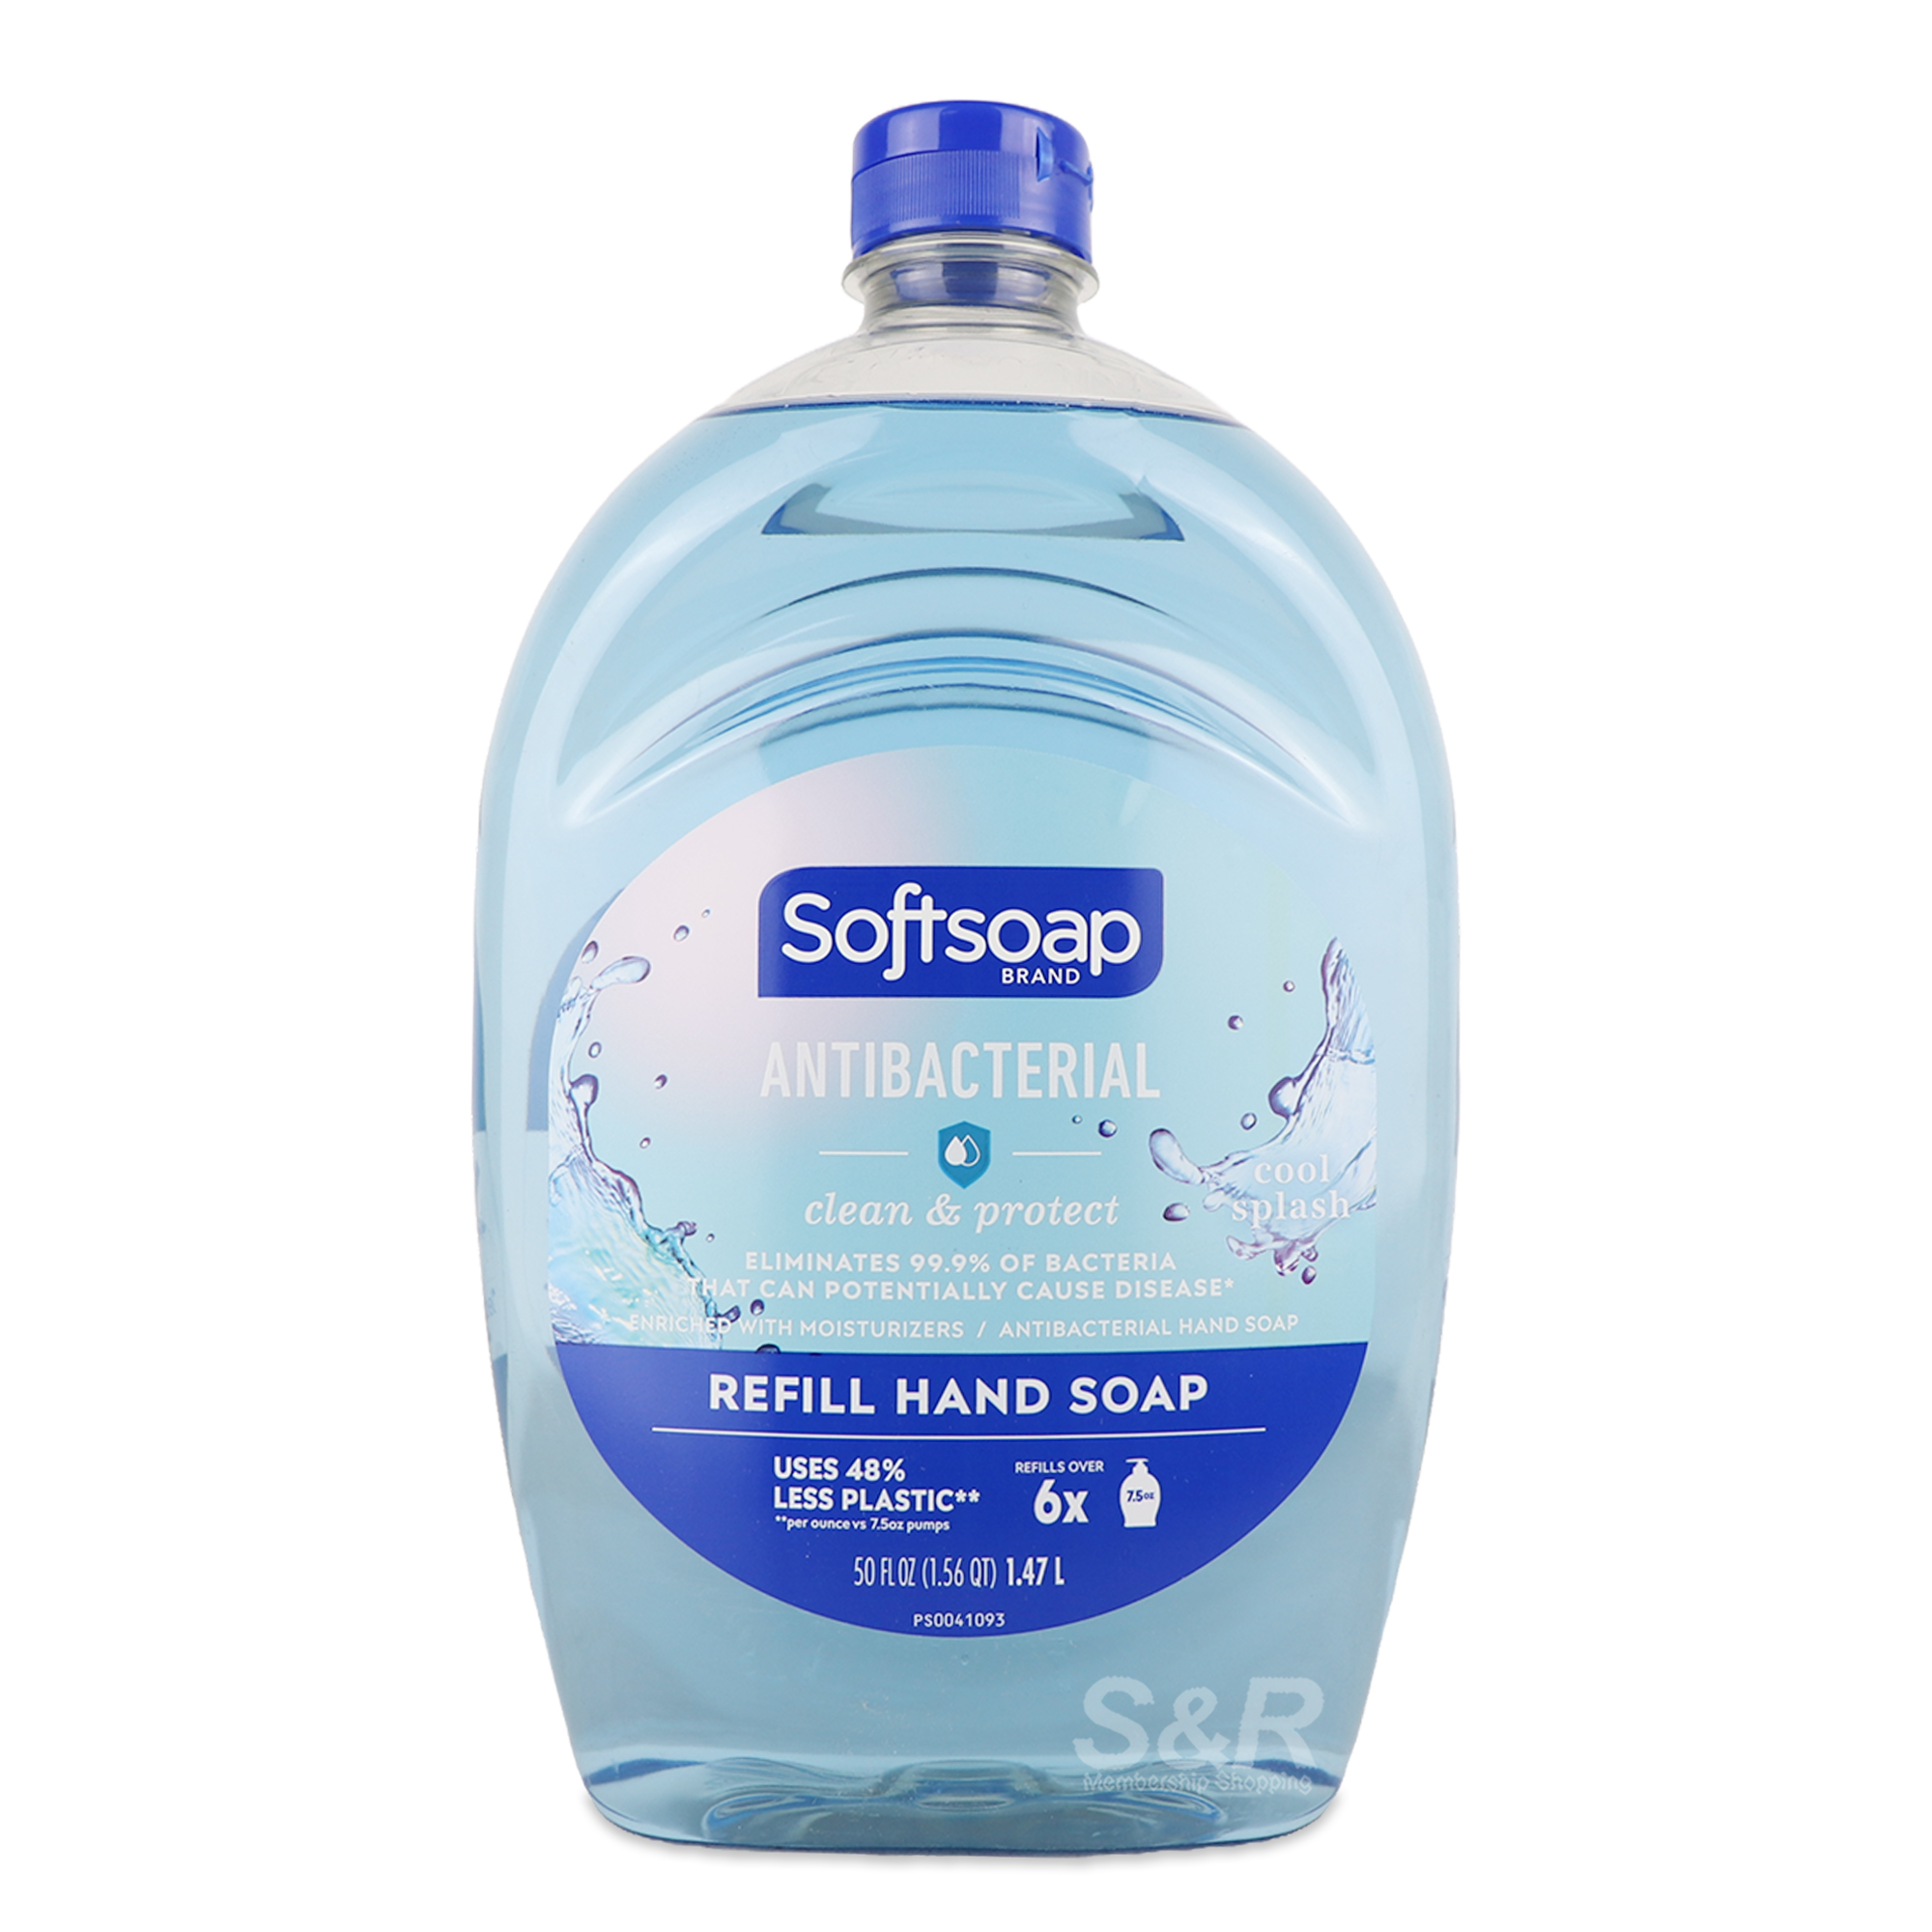 Softsoap Antibacterial Refill Hand Soap Cool and Protect 1.47L